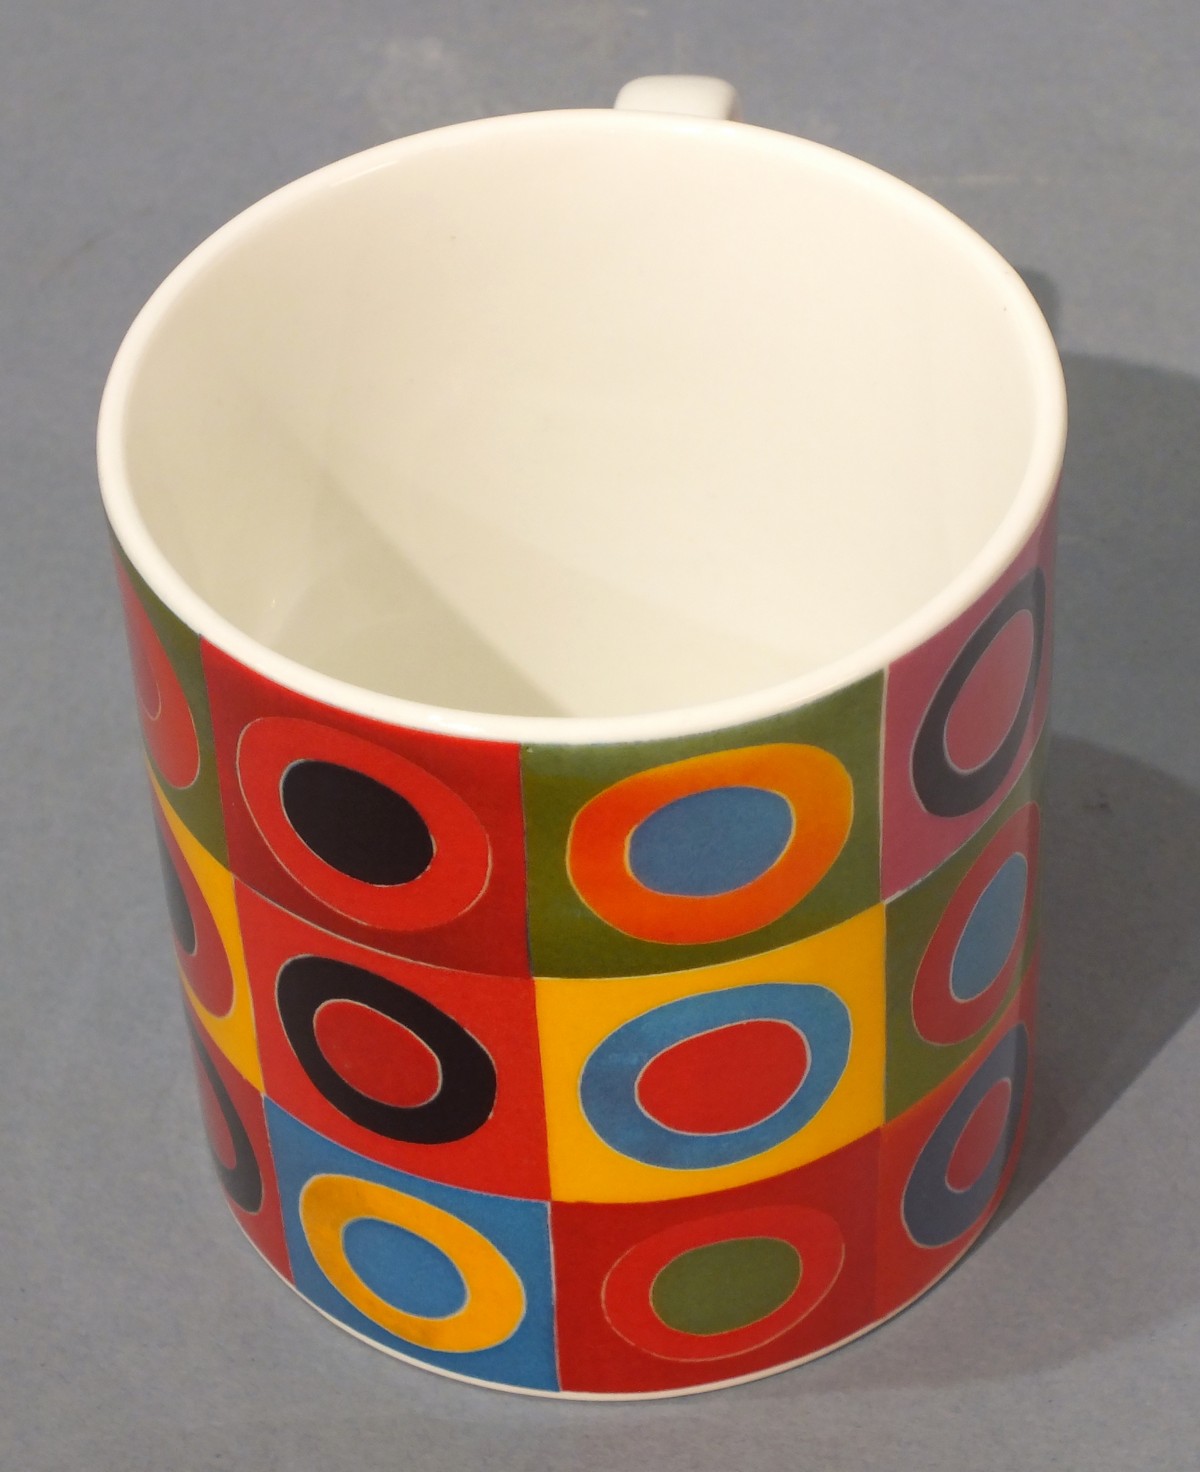 Sir Terry FROST (British 1915-2003) Orchard Tambourine Mug (on behalf of Royal Academy of Arts), - Image 4 of 10